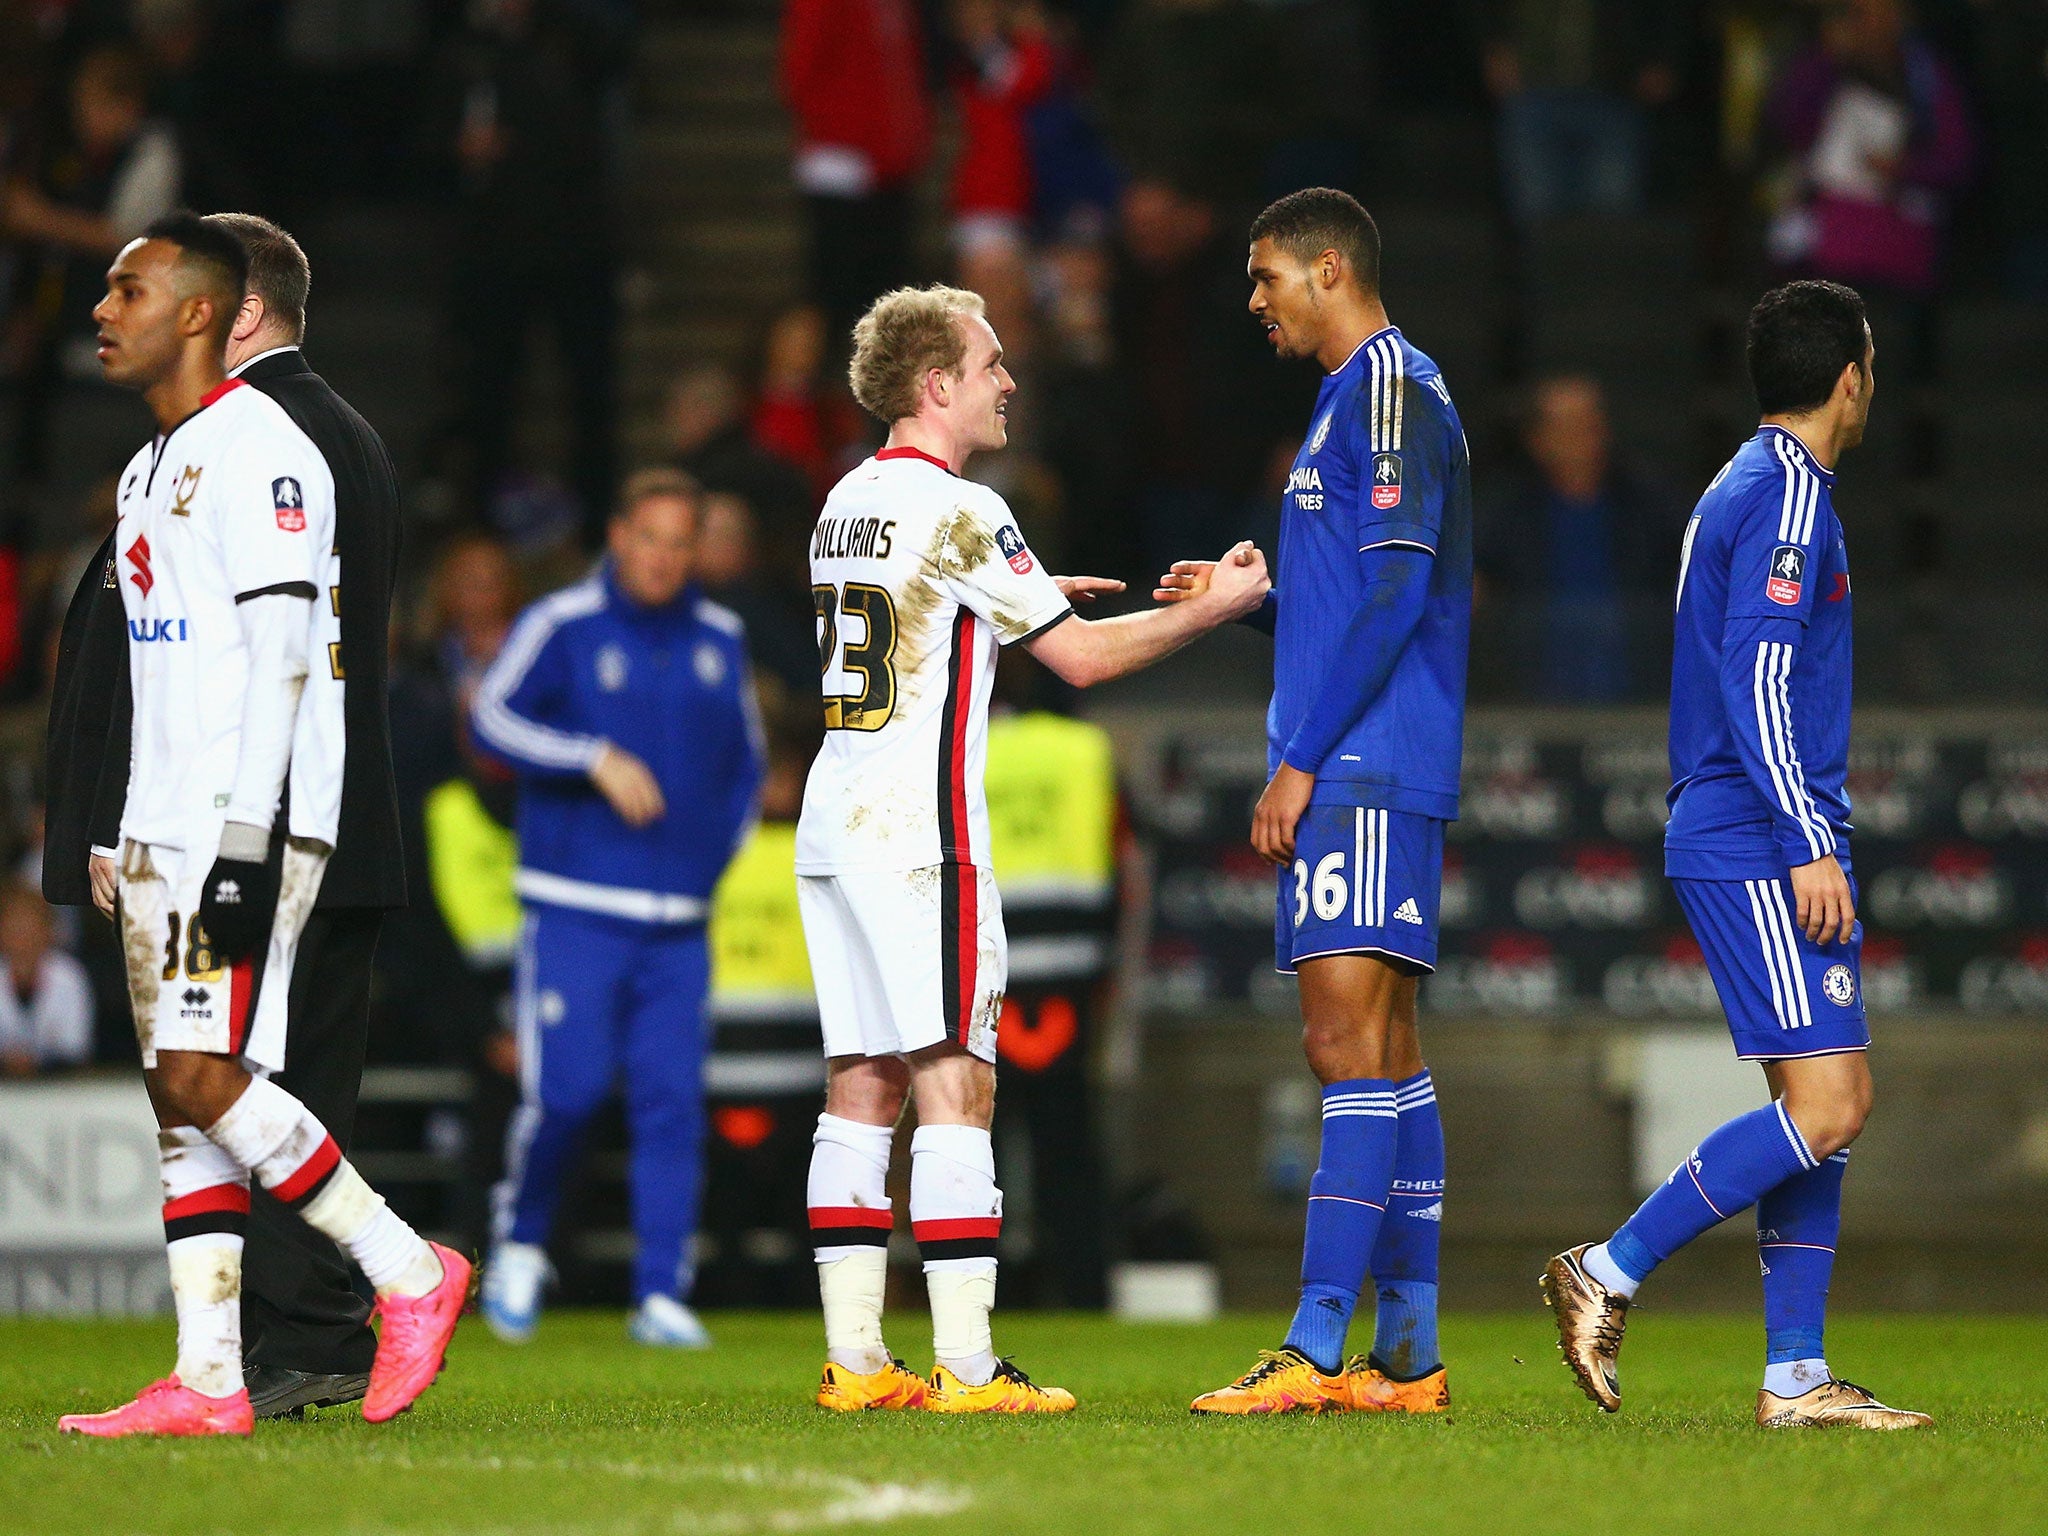 Johnny Williams and Ruben Loftus-Cheek shake hands after the game